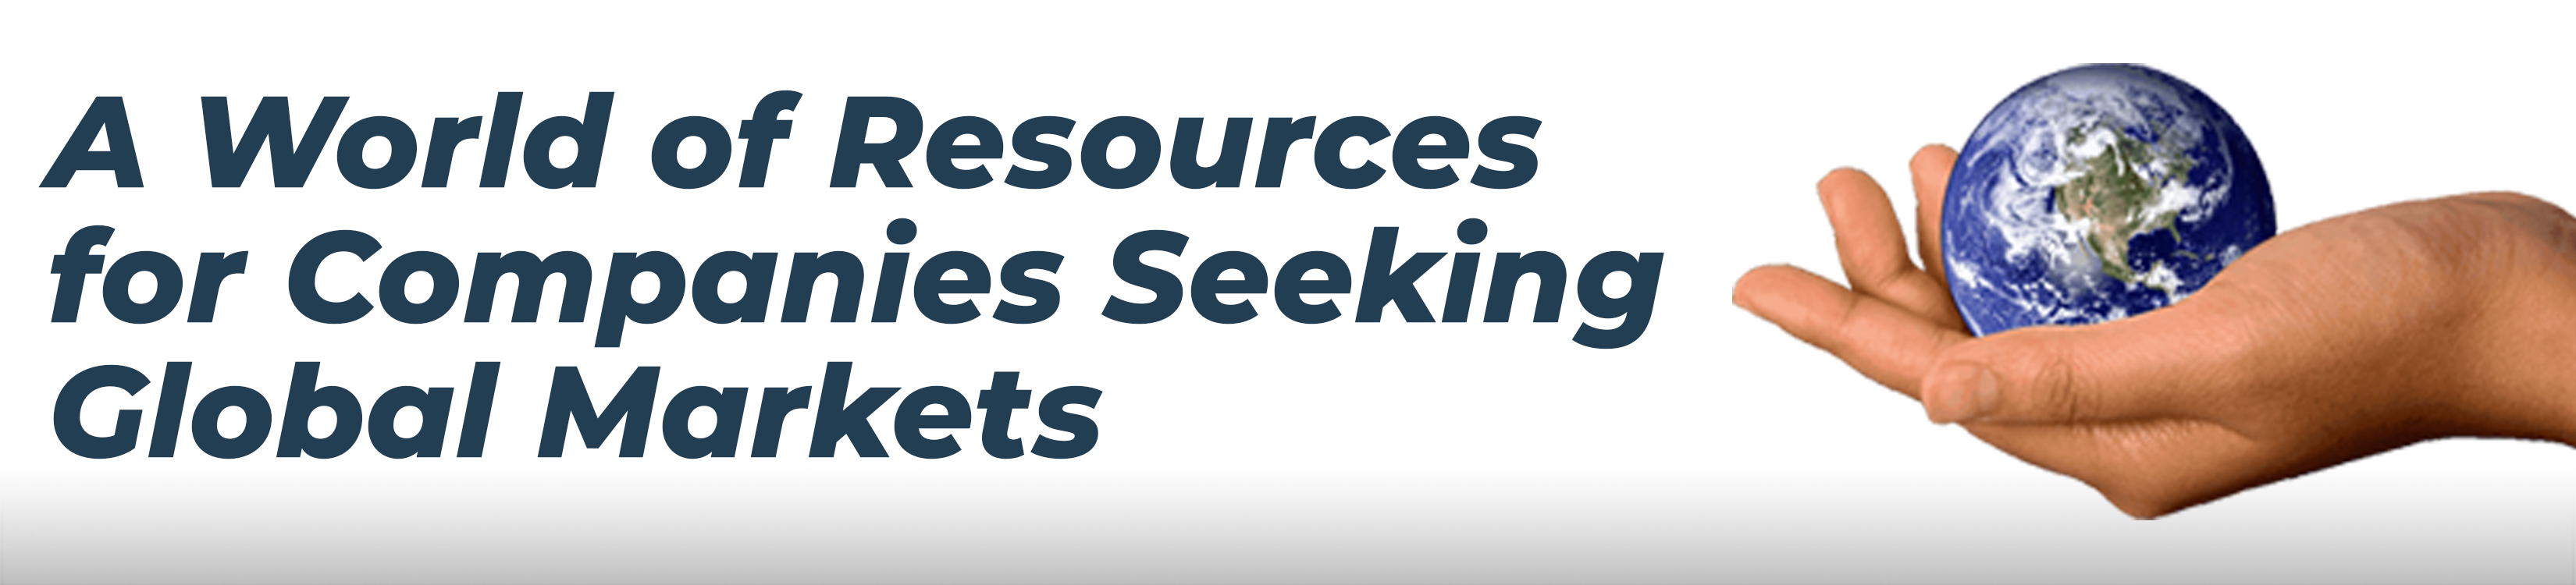 A World of Resources for Companies Seeking Global Markets